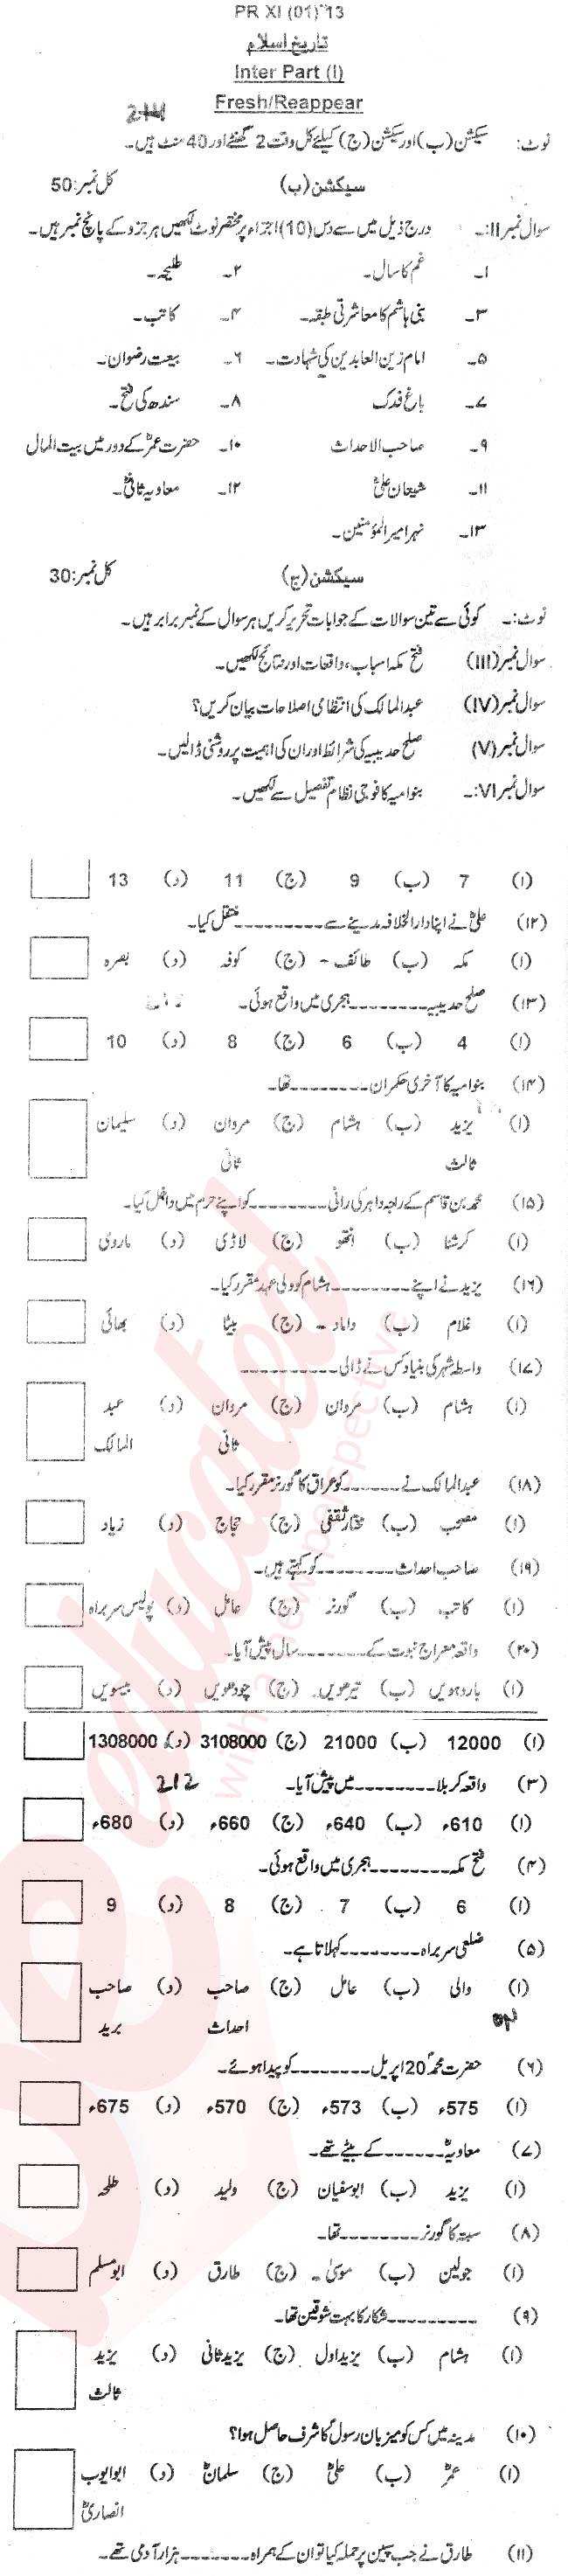 Islamic History FA Part 1 Past Paper Group 1 BISE Bannu 2013